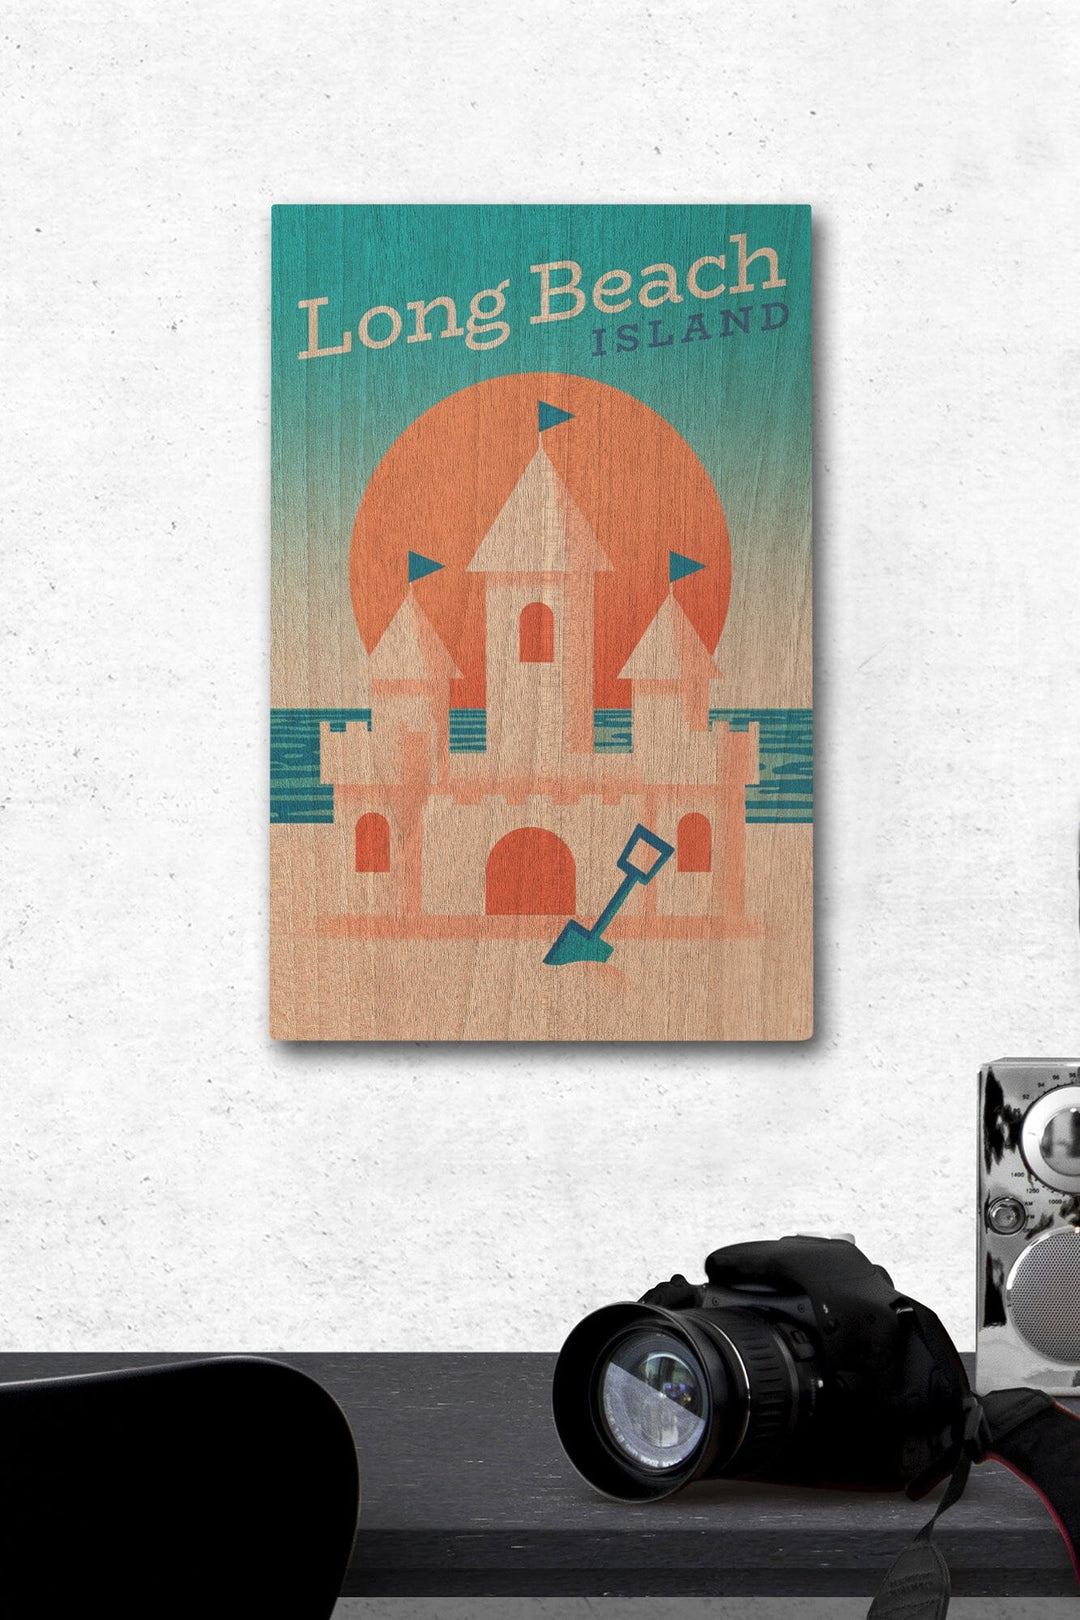 Long Beach Island, New Jersey, Sun-faded Shoreline Collection, Sand Castle on Beach, Wood Signs and Postcards Wood Lantern Press 12 x 18 Wood Gallery Print 